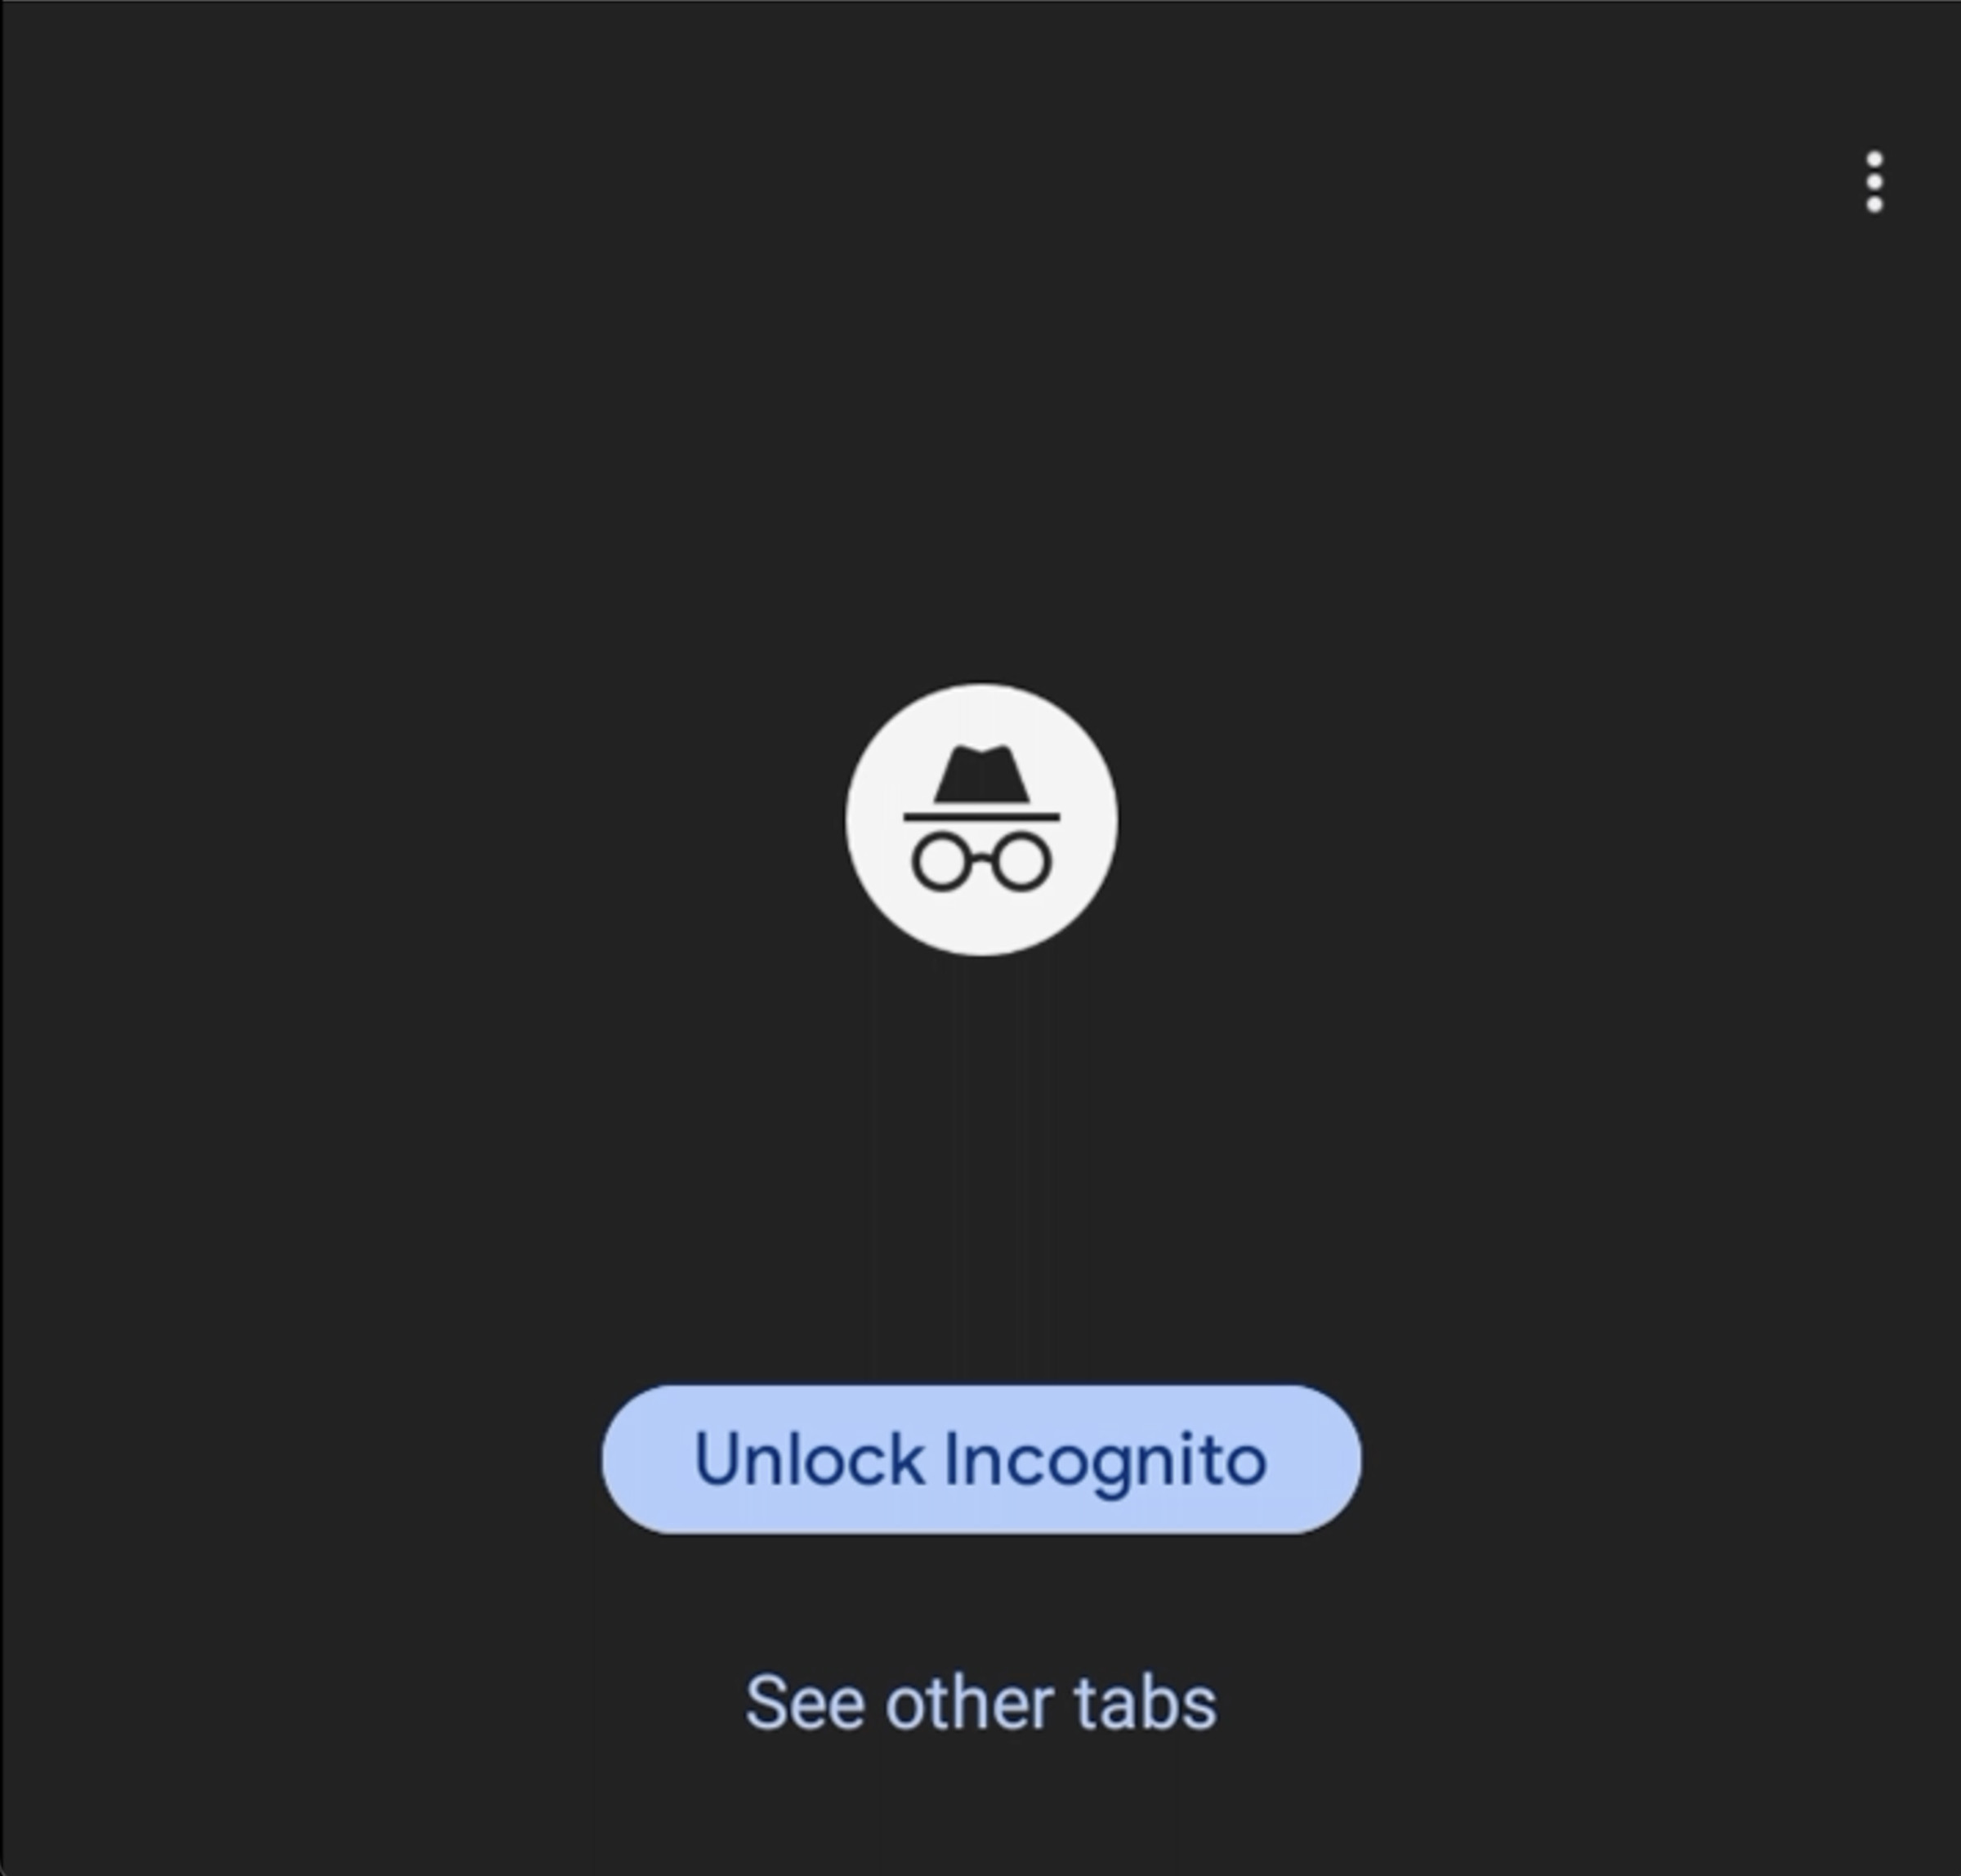 Screenshot of the unlock incognito screen, with a “see other tabs” button.